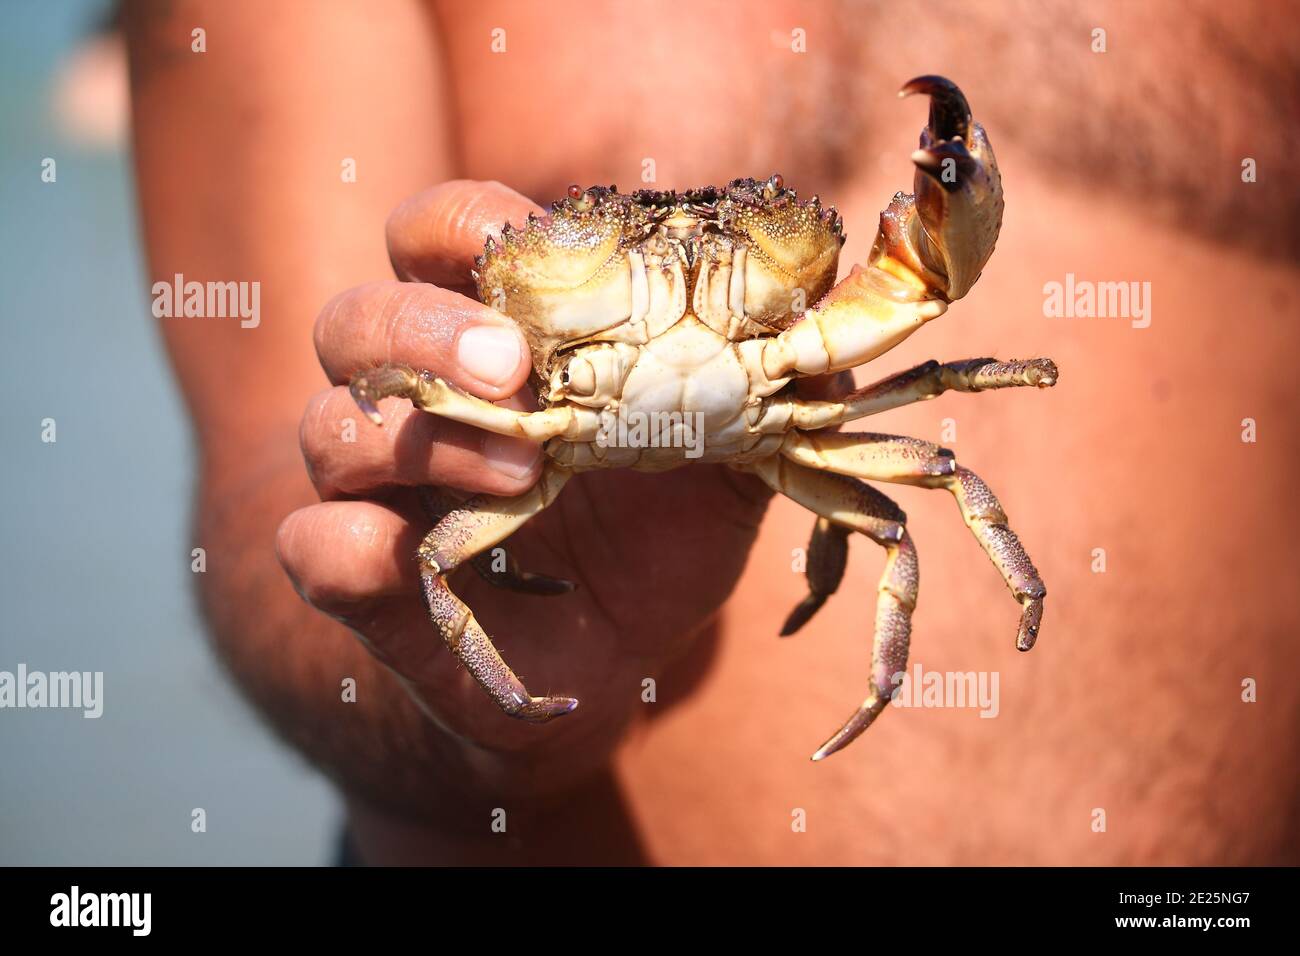 A man holding a crab Stock Photo